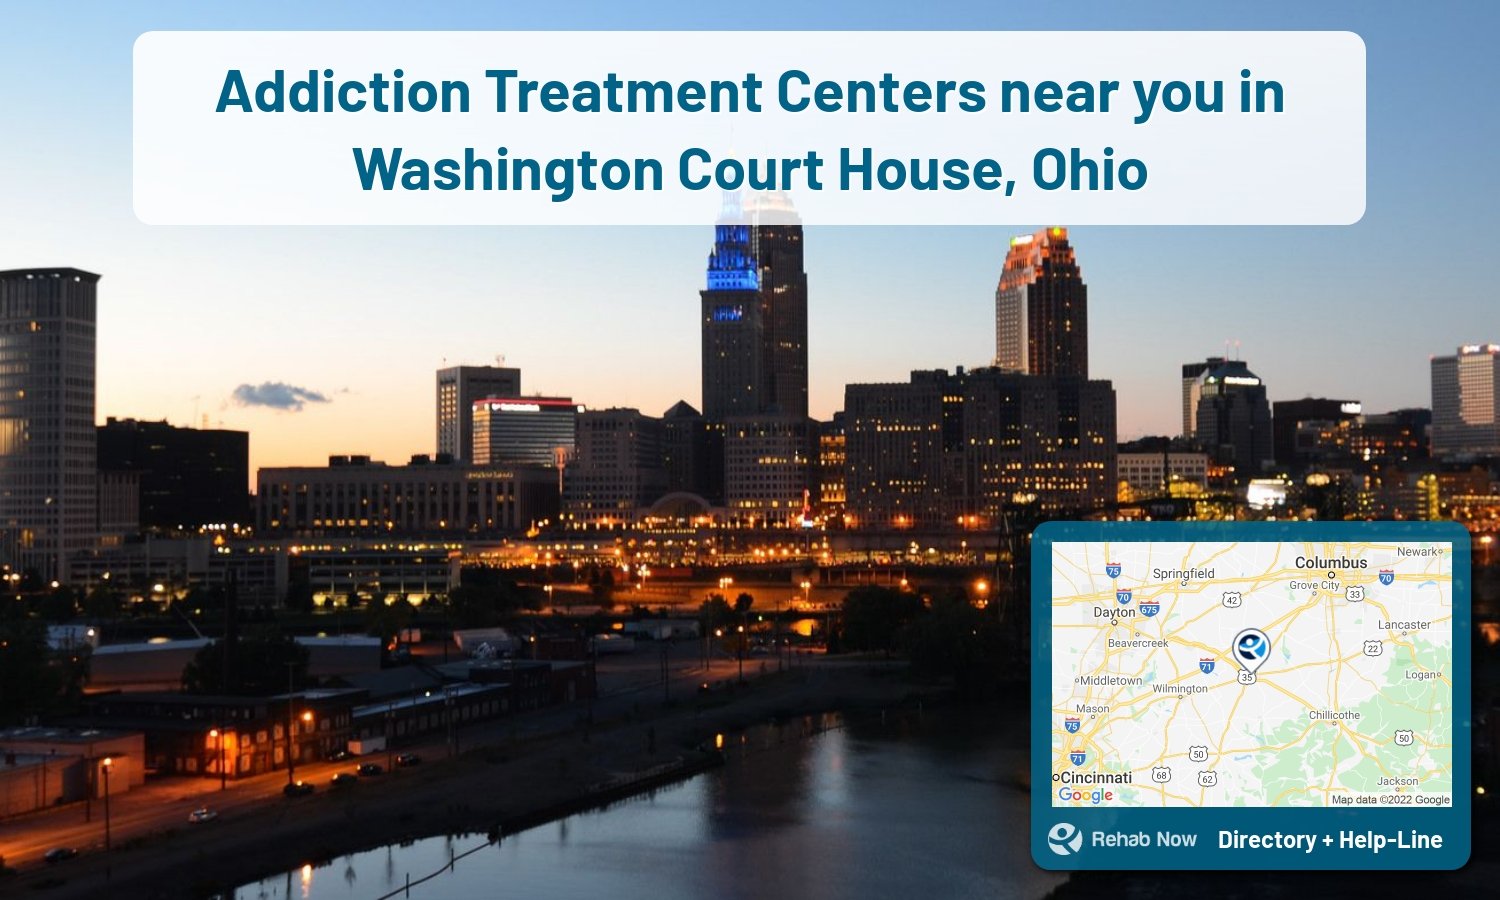 Washington Court House, OH Treatment Centers. Find drug rehab in Washington Court House, Ohio, or detox and treatment programs. Get the right help now!